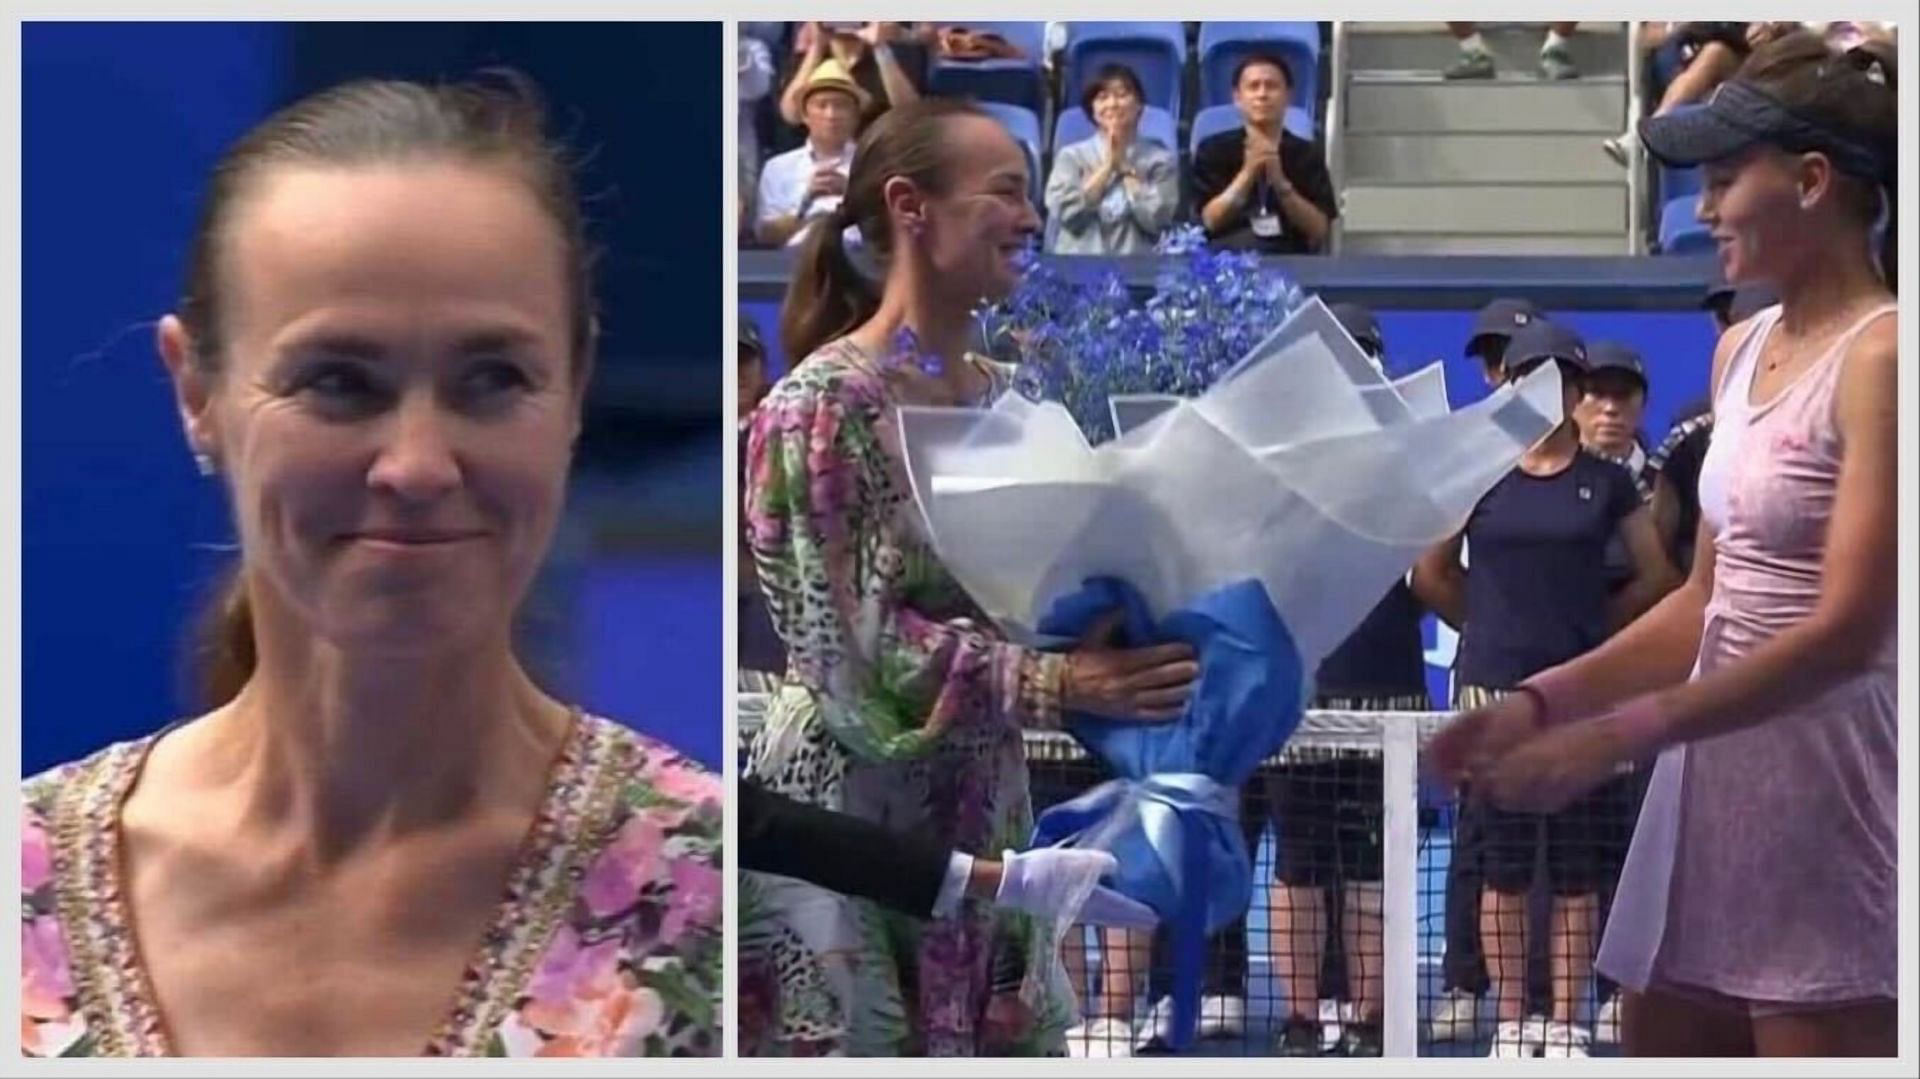 Martina Hingis attends awards ceremony for Toray Pan Pacific Open